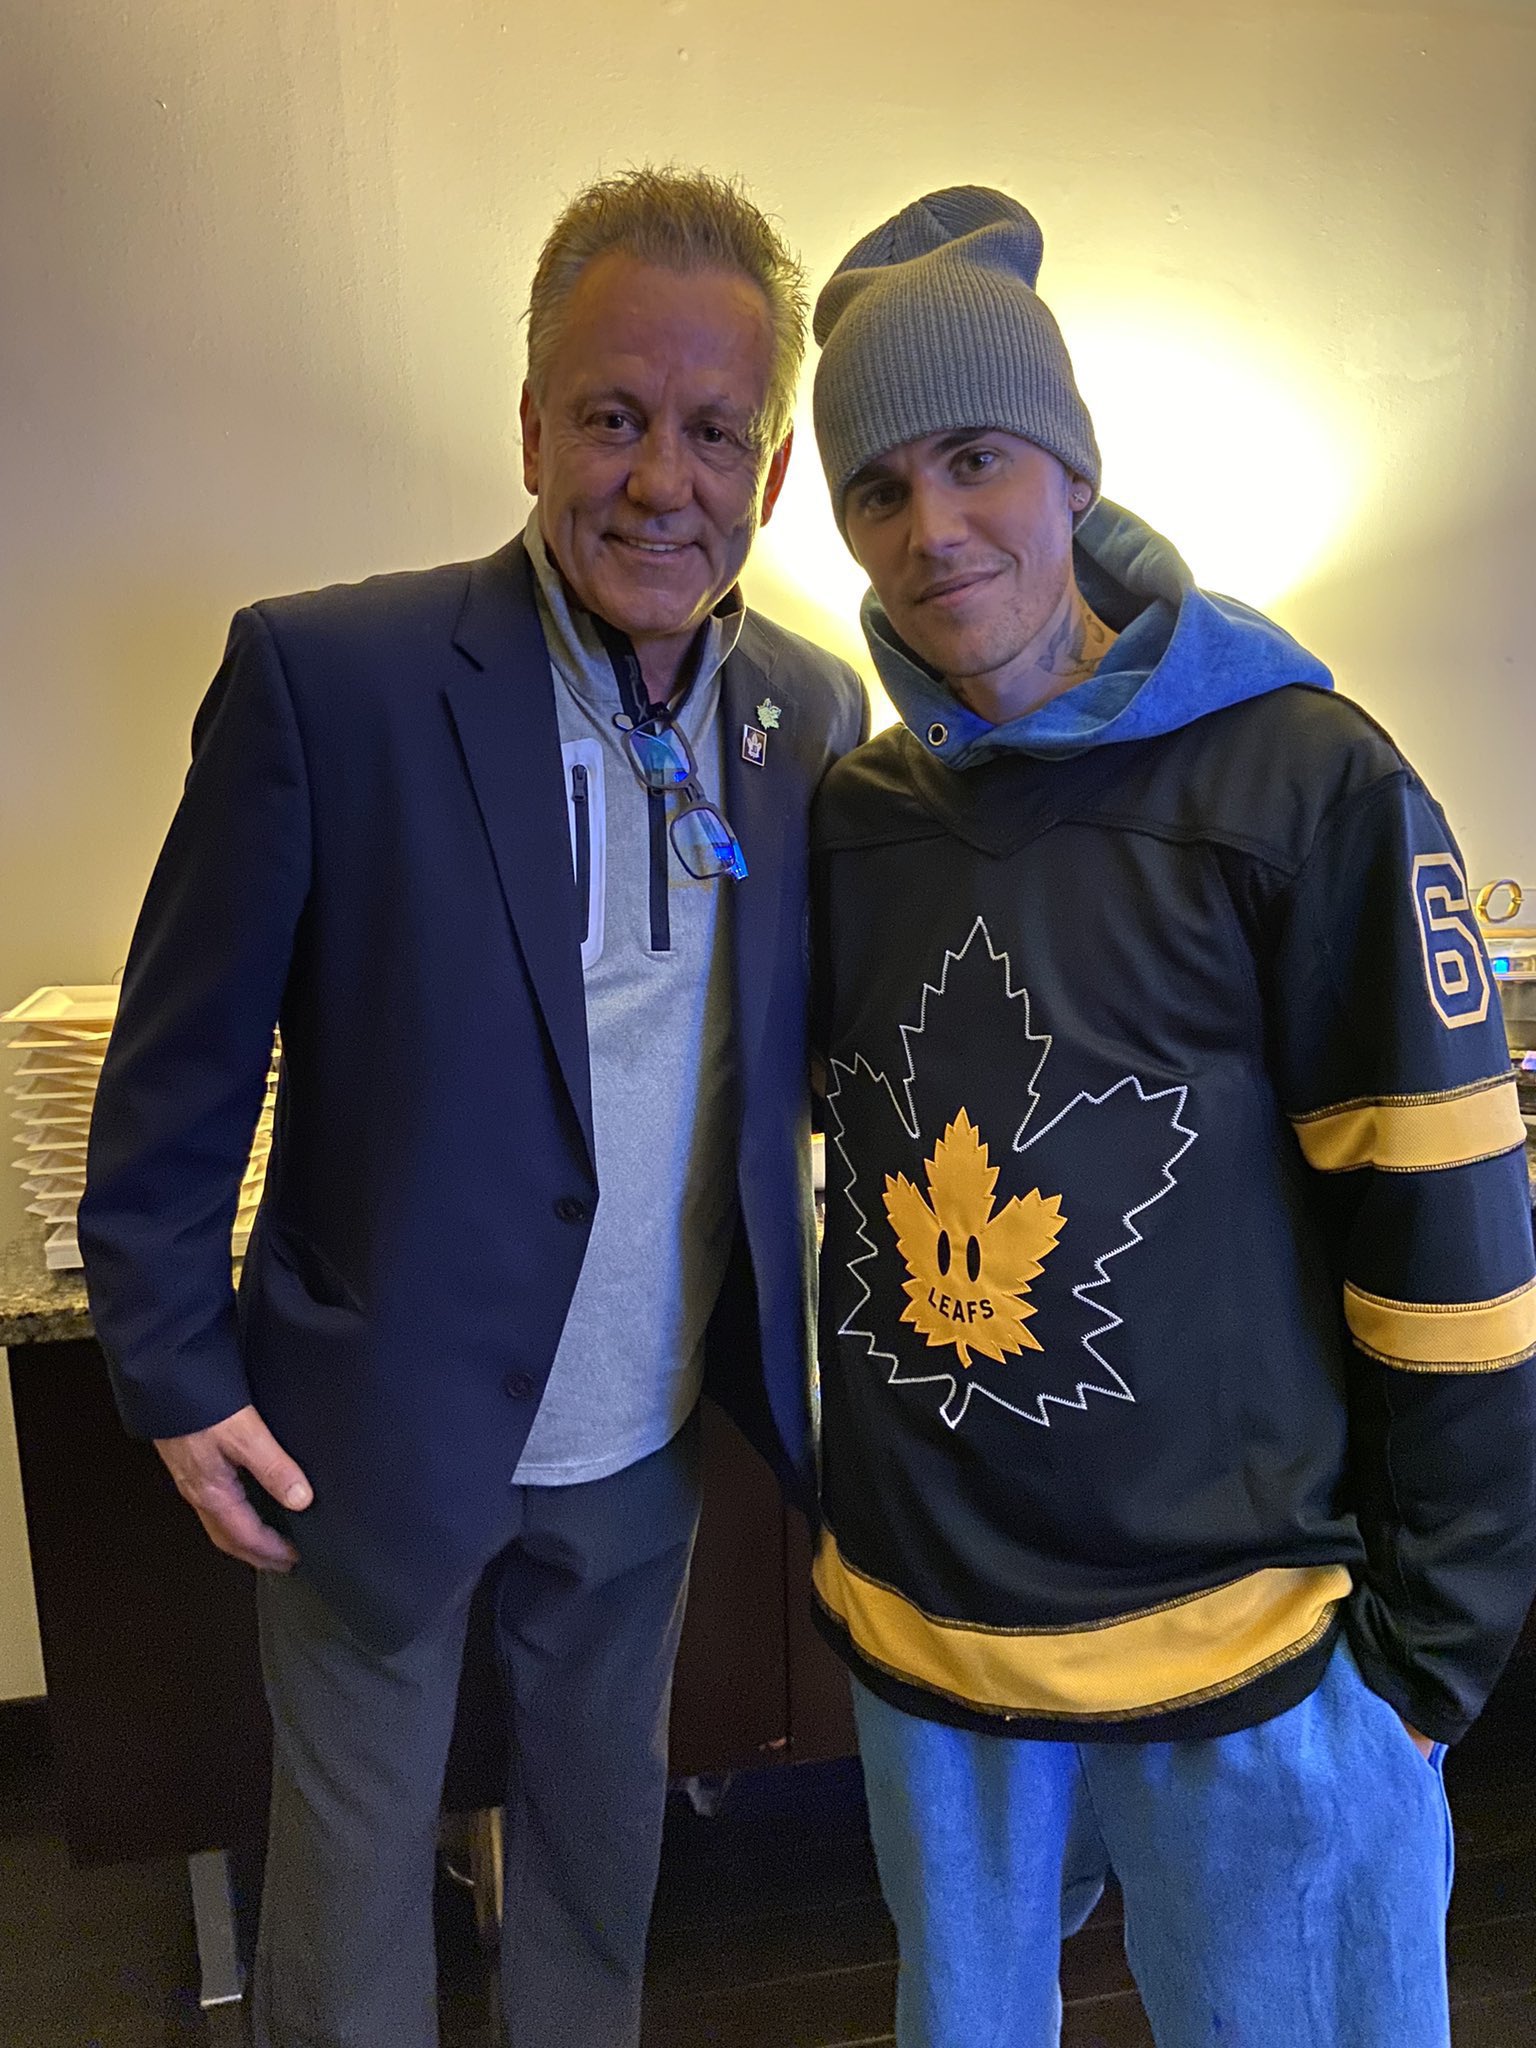 Justin Bieber at the Toronto Maple Leafs game tonight (March 23rd).